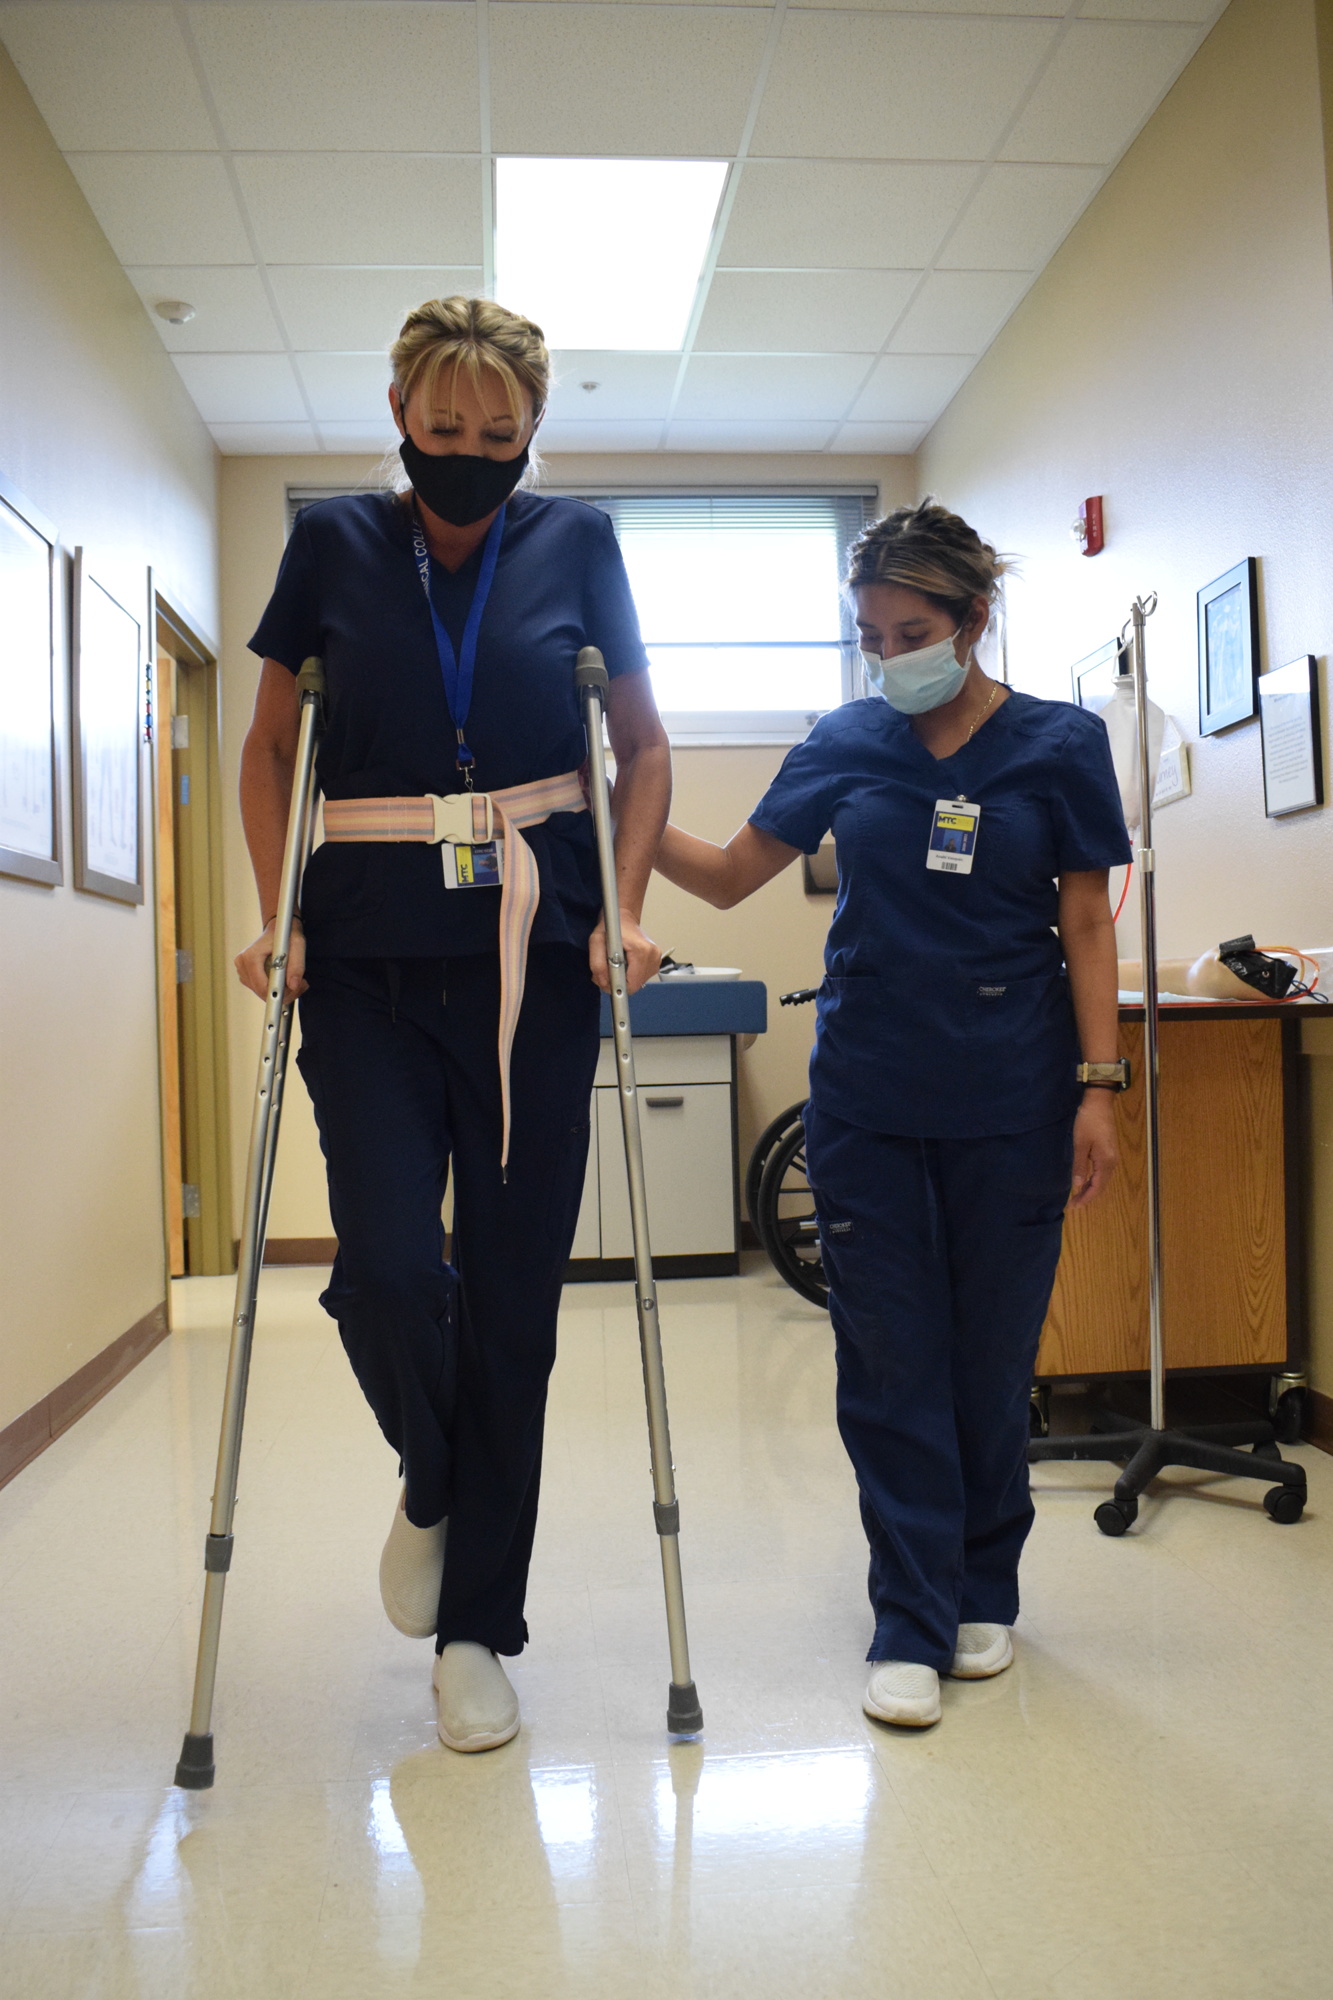 Valerie Temple, a hybrid Medical Assisting student, learns how to use crutches alongside Anahi Vasquez.